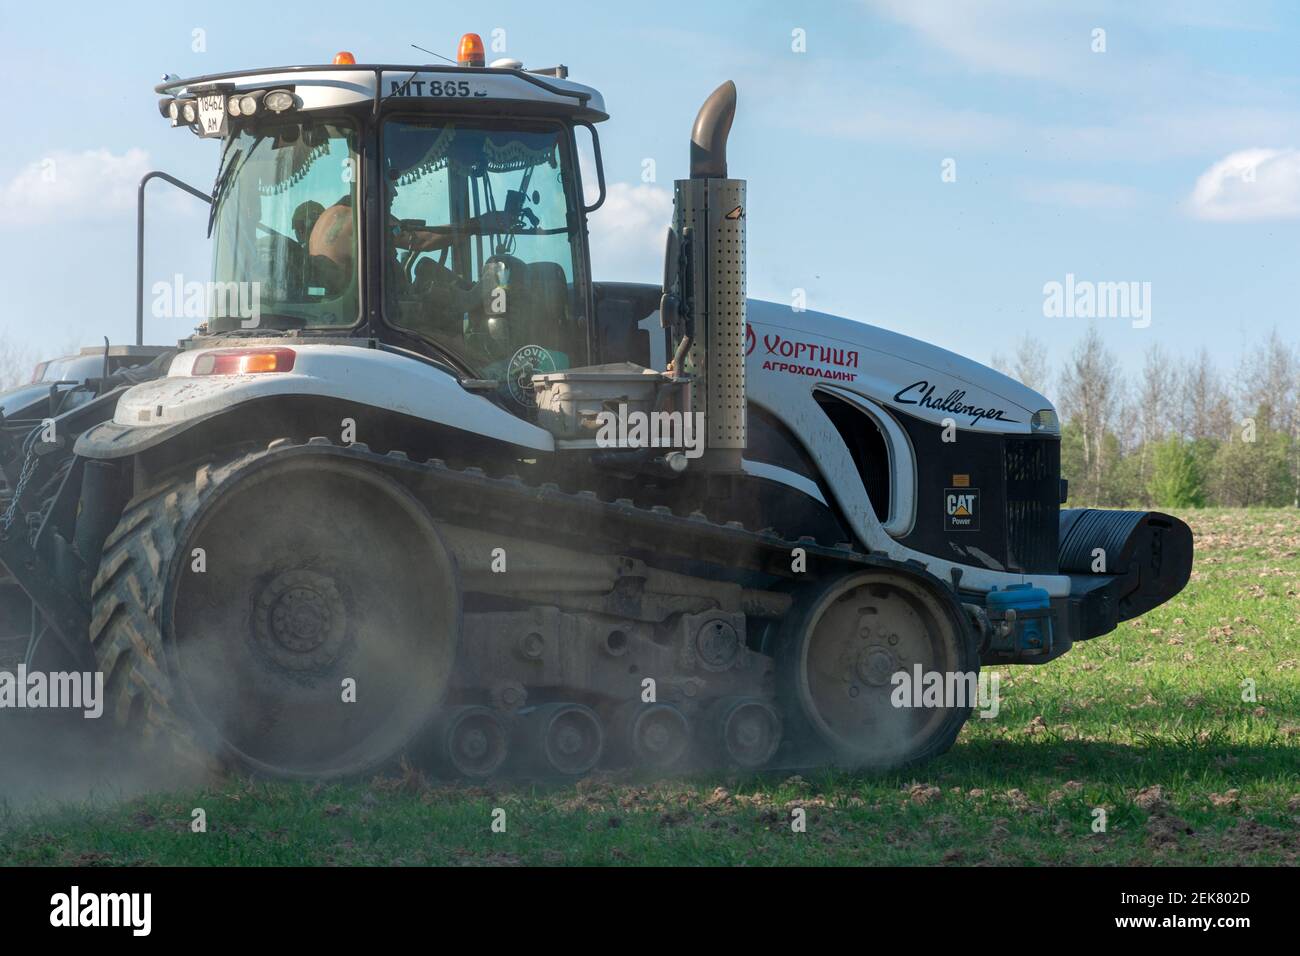 Dolyna, Ukraine April 29, 2020: agro-industrial machinery will cultivate the fields, a tractor of a challender company on caterpillars, an agricultura Stock Photo